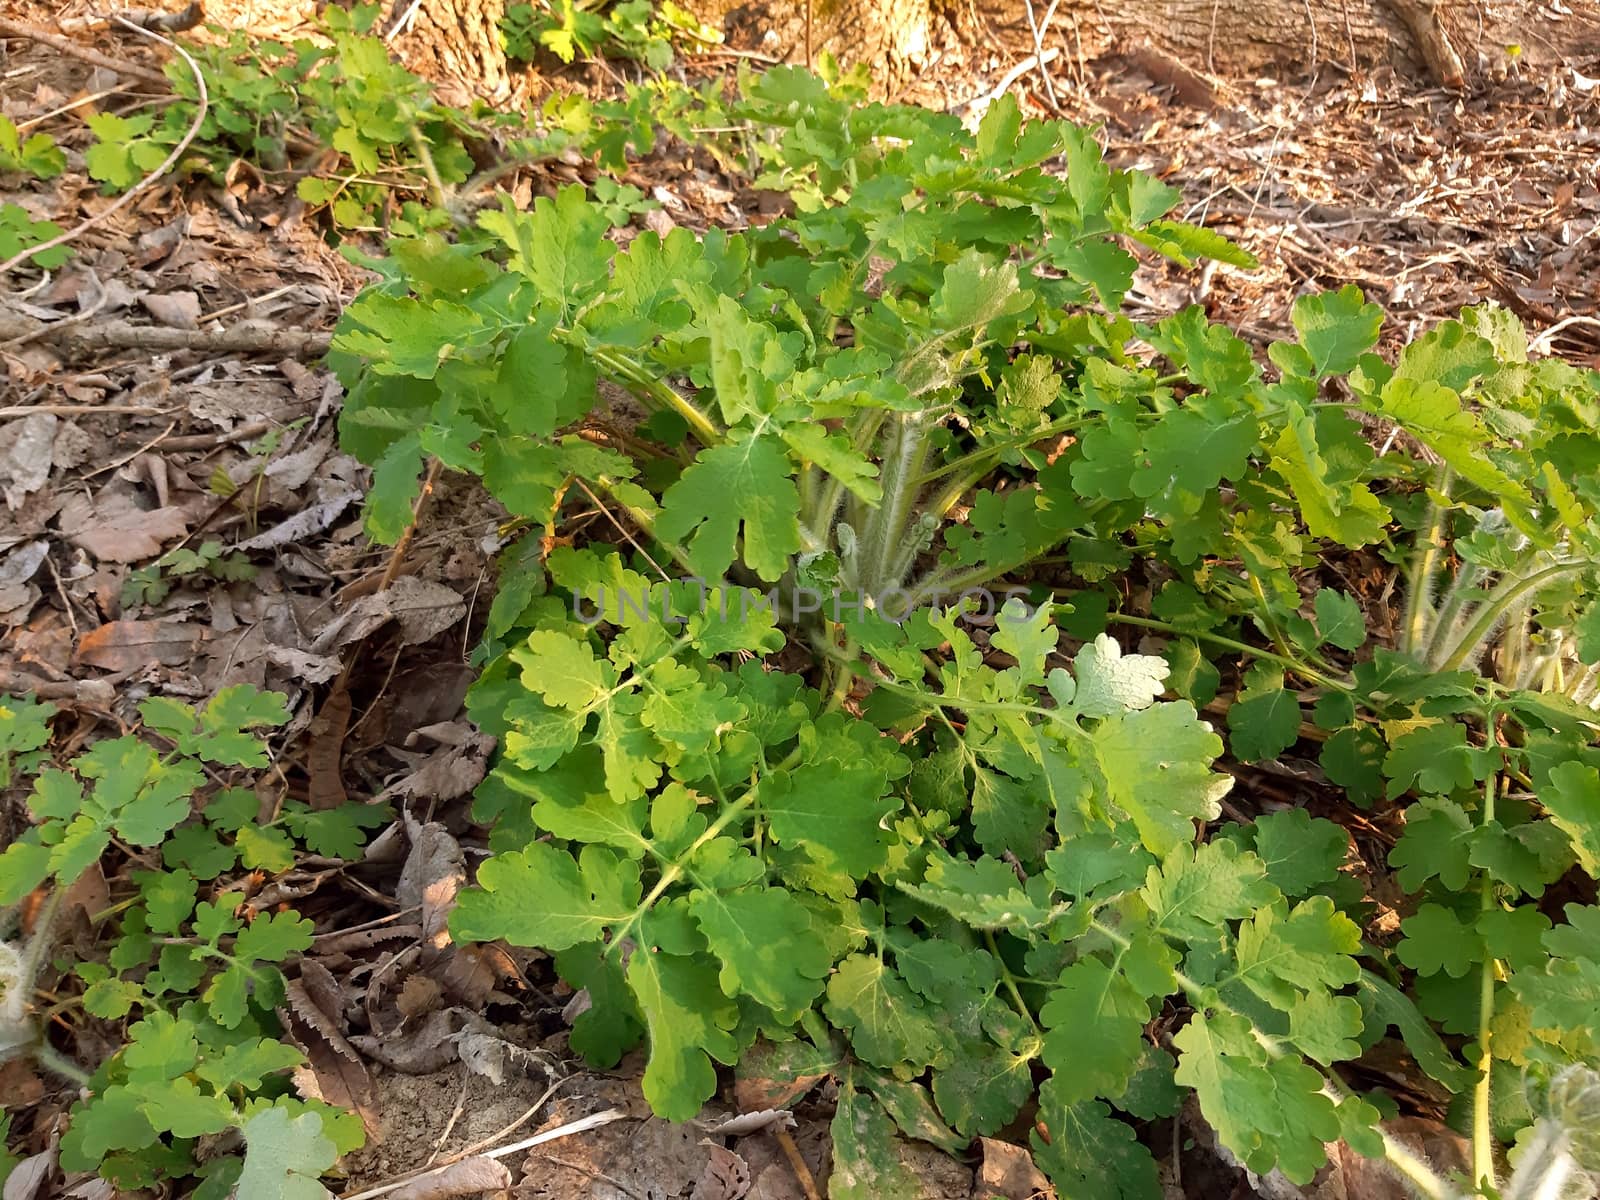 Chelidonium majus medicinal plant fresh growth in spring by Mindru